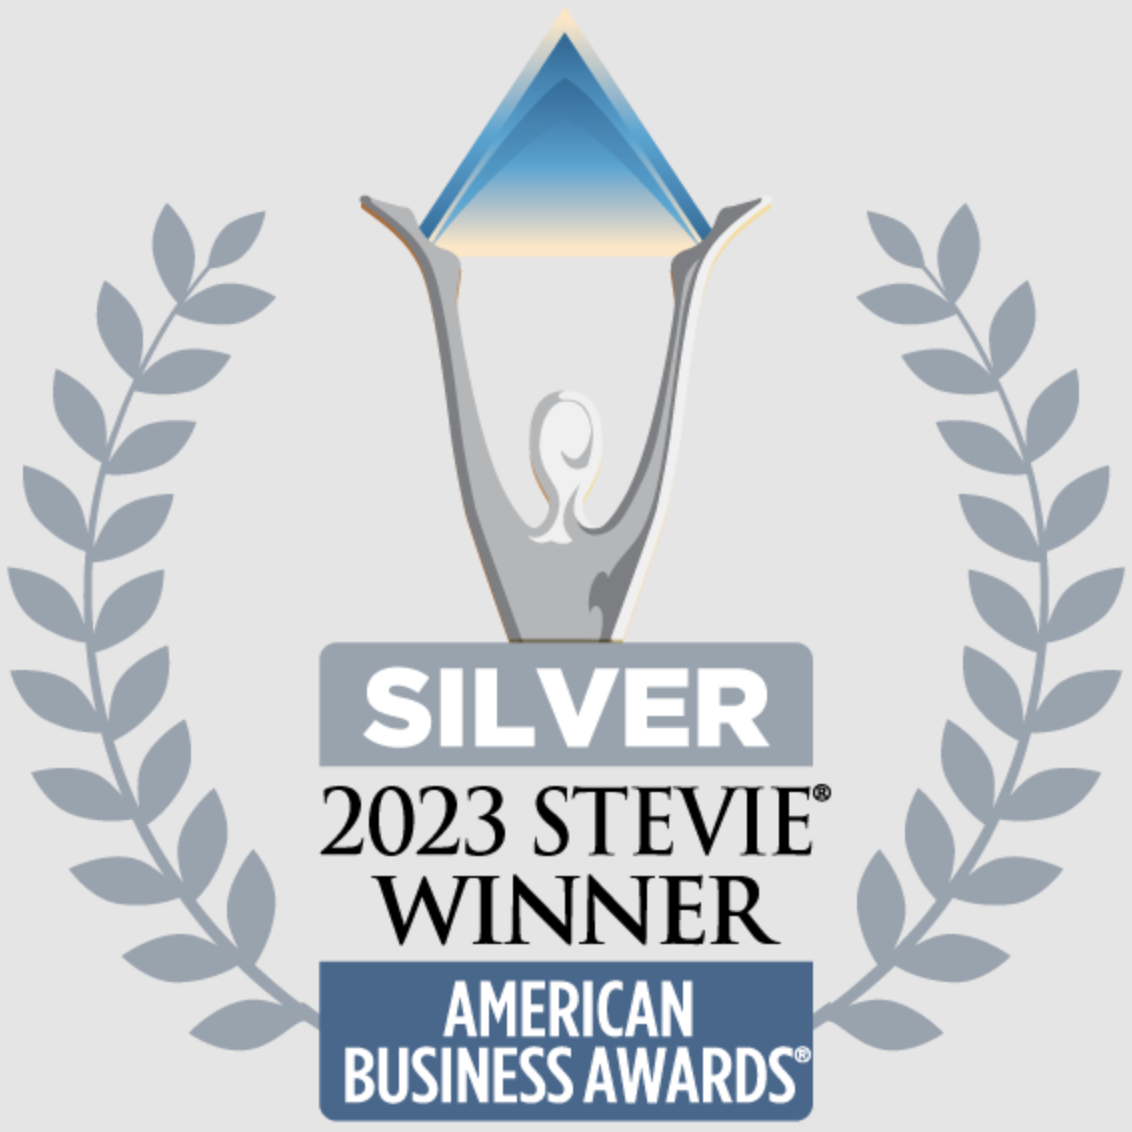 ACCUTITLE HONORED AS OF THE YEAR” STEVIE® AWARD WINNER IN 2023